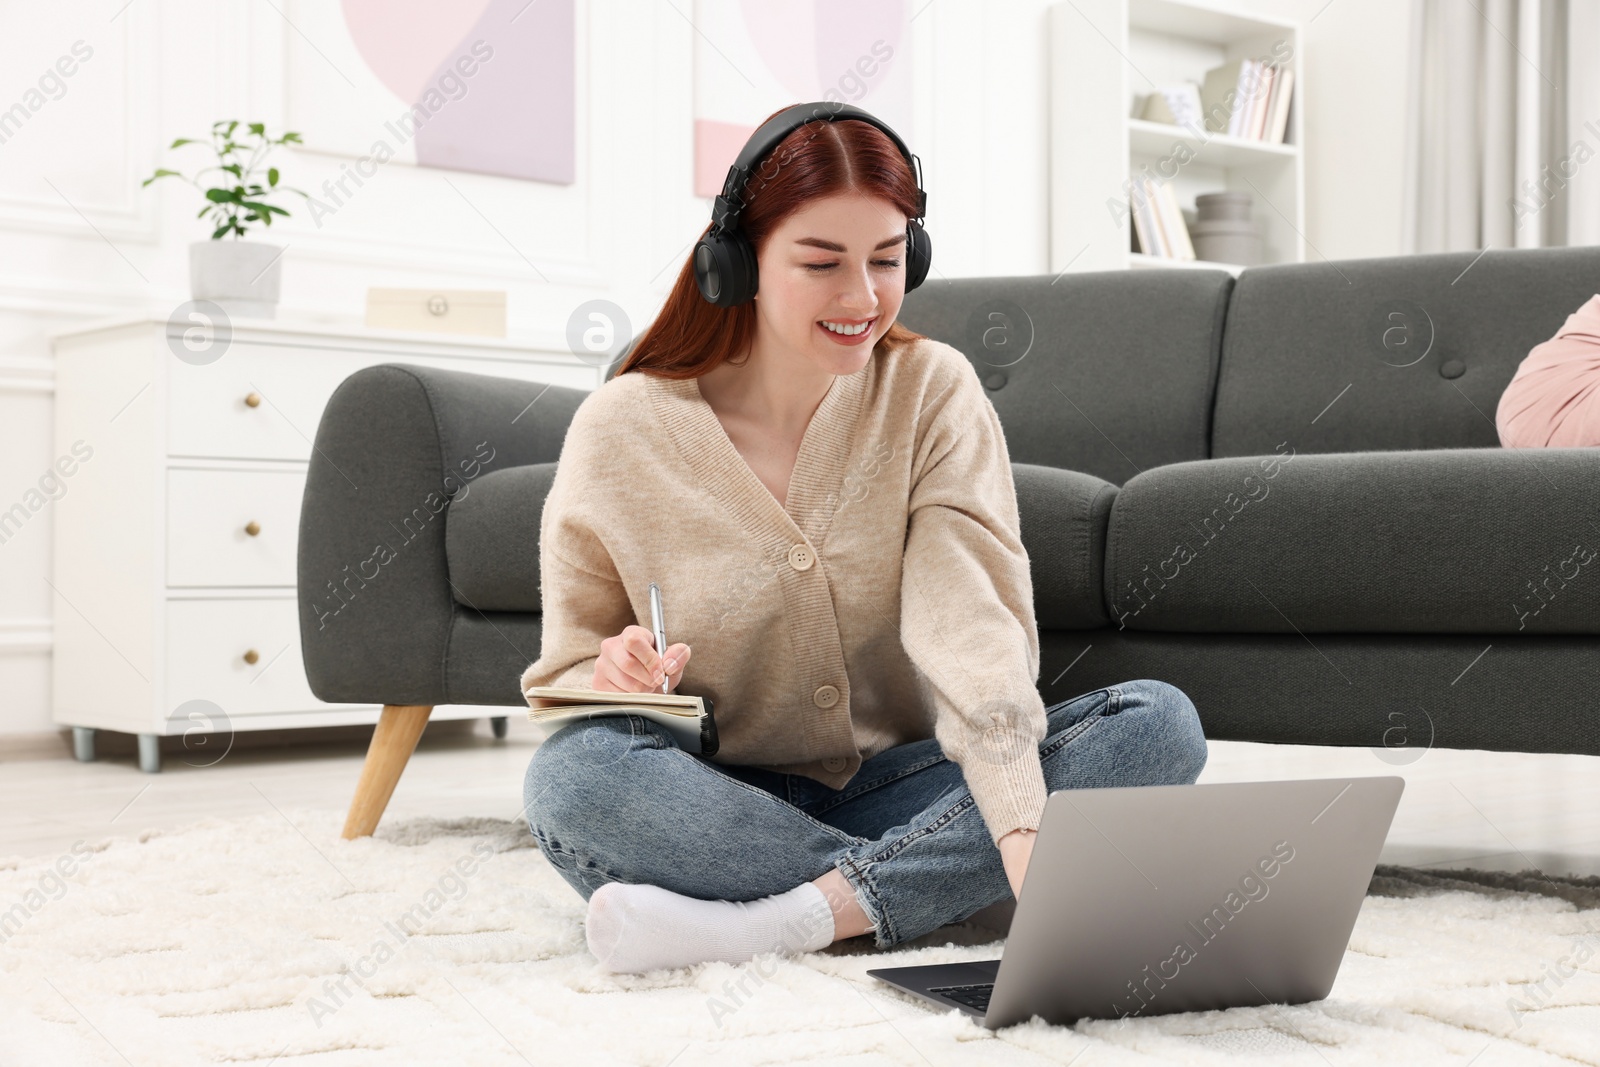 Photo of Happy woman with headphones and notebook using laptop on rug in living room